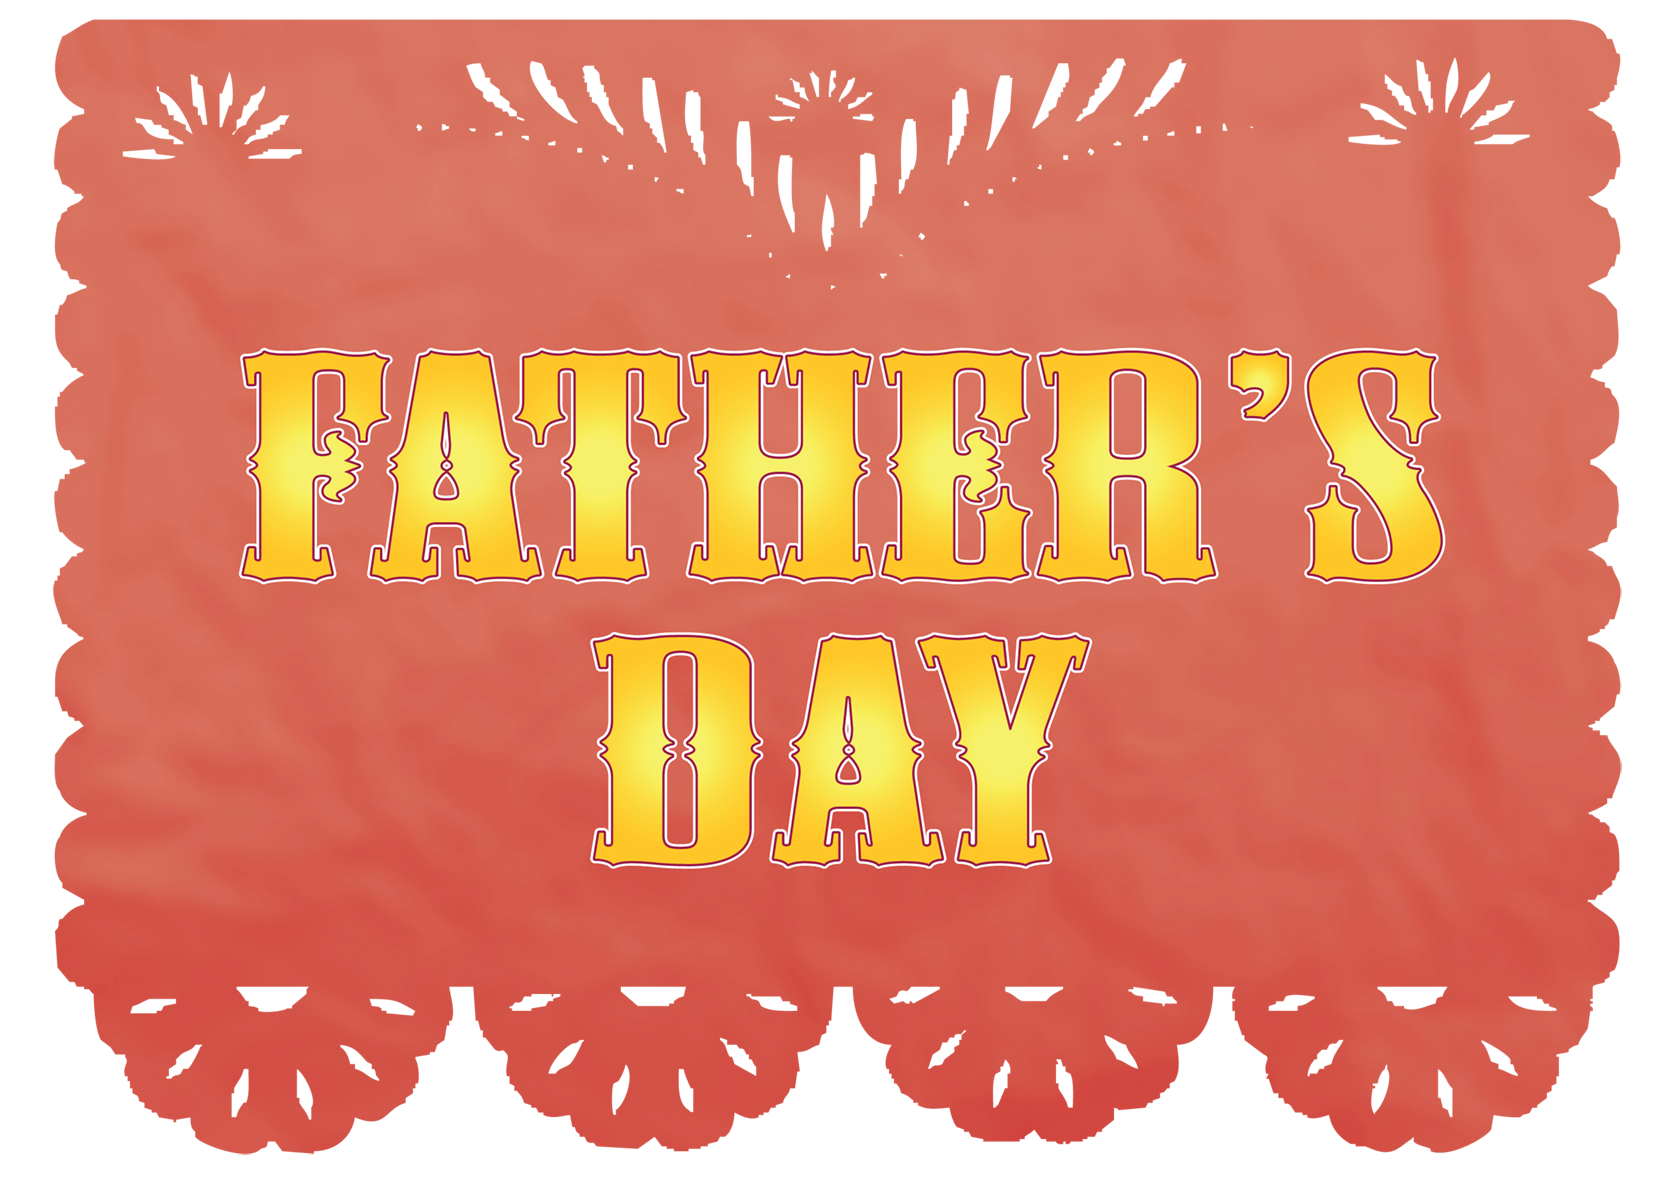 Father's Day in Old Town Logo